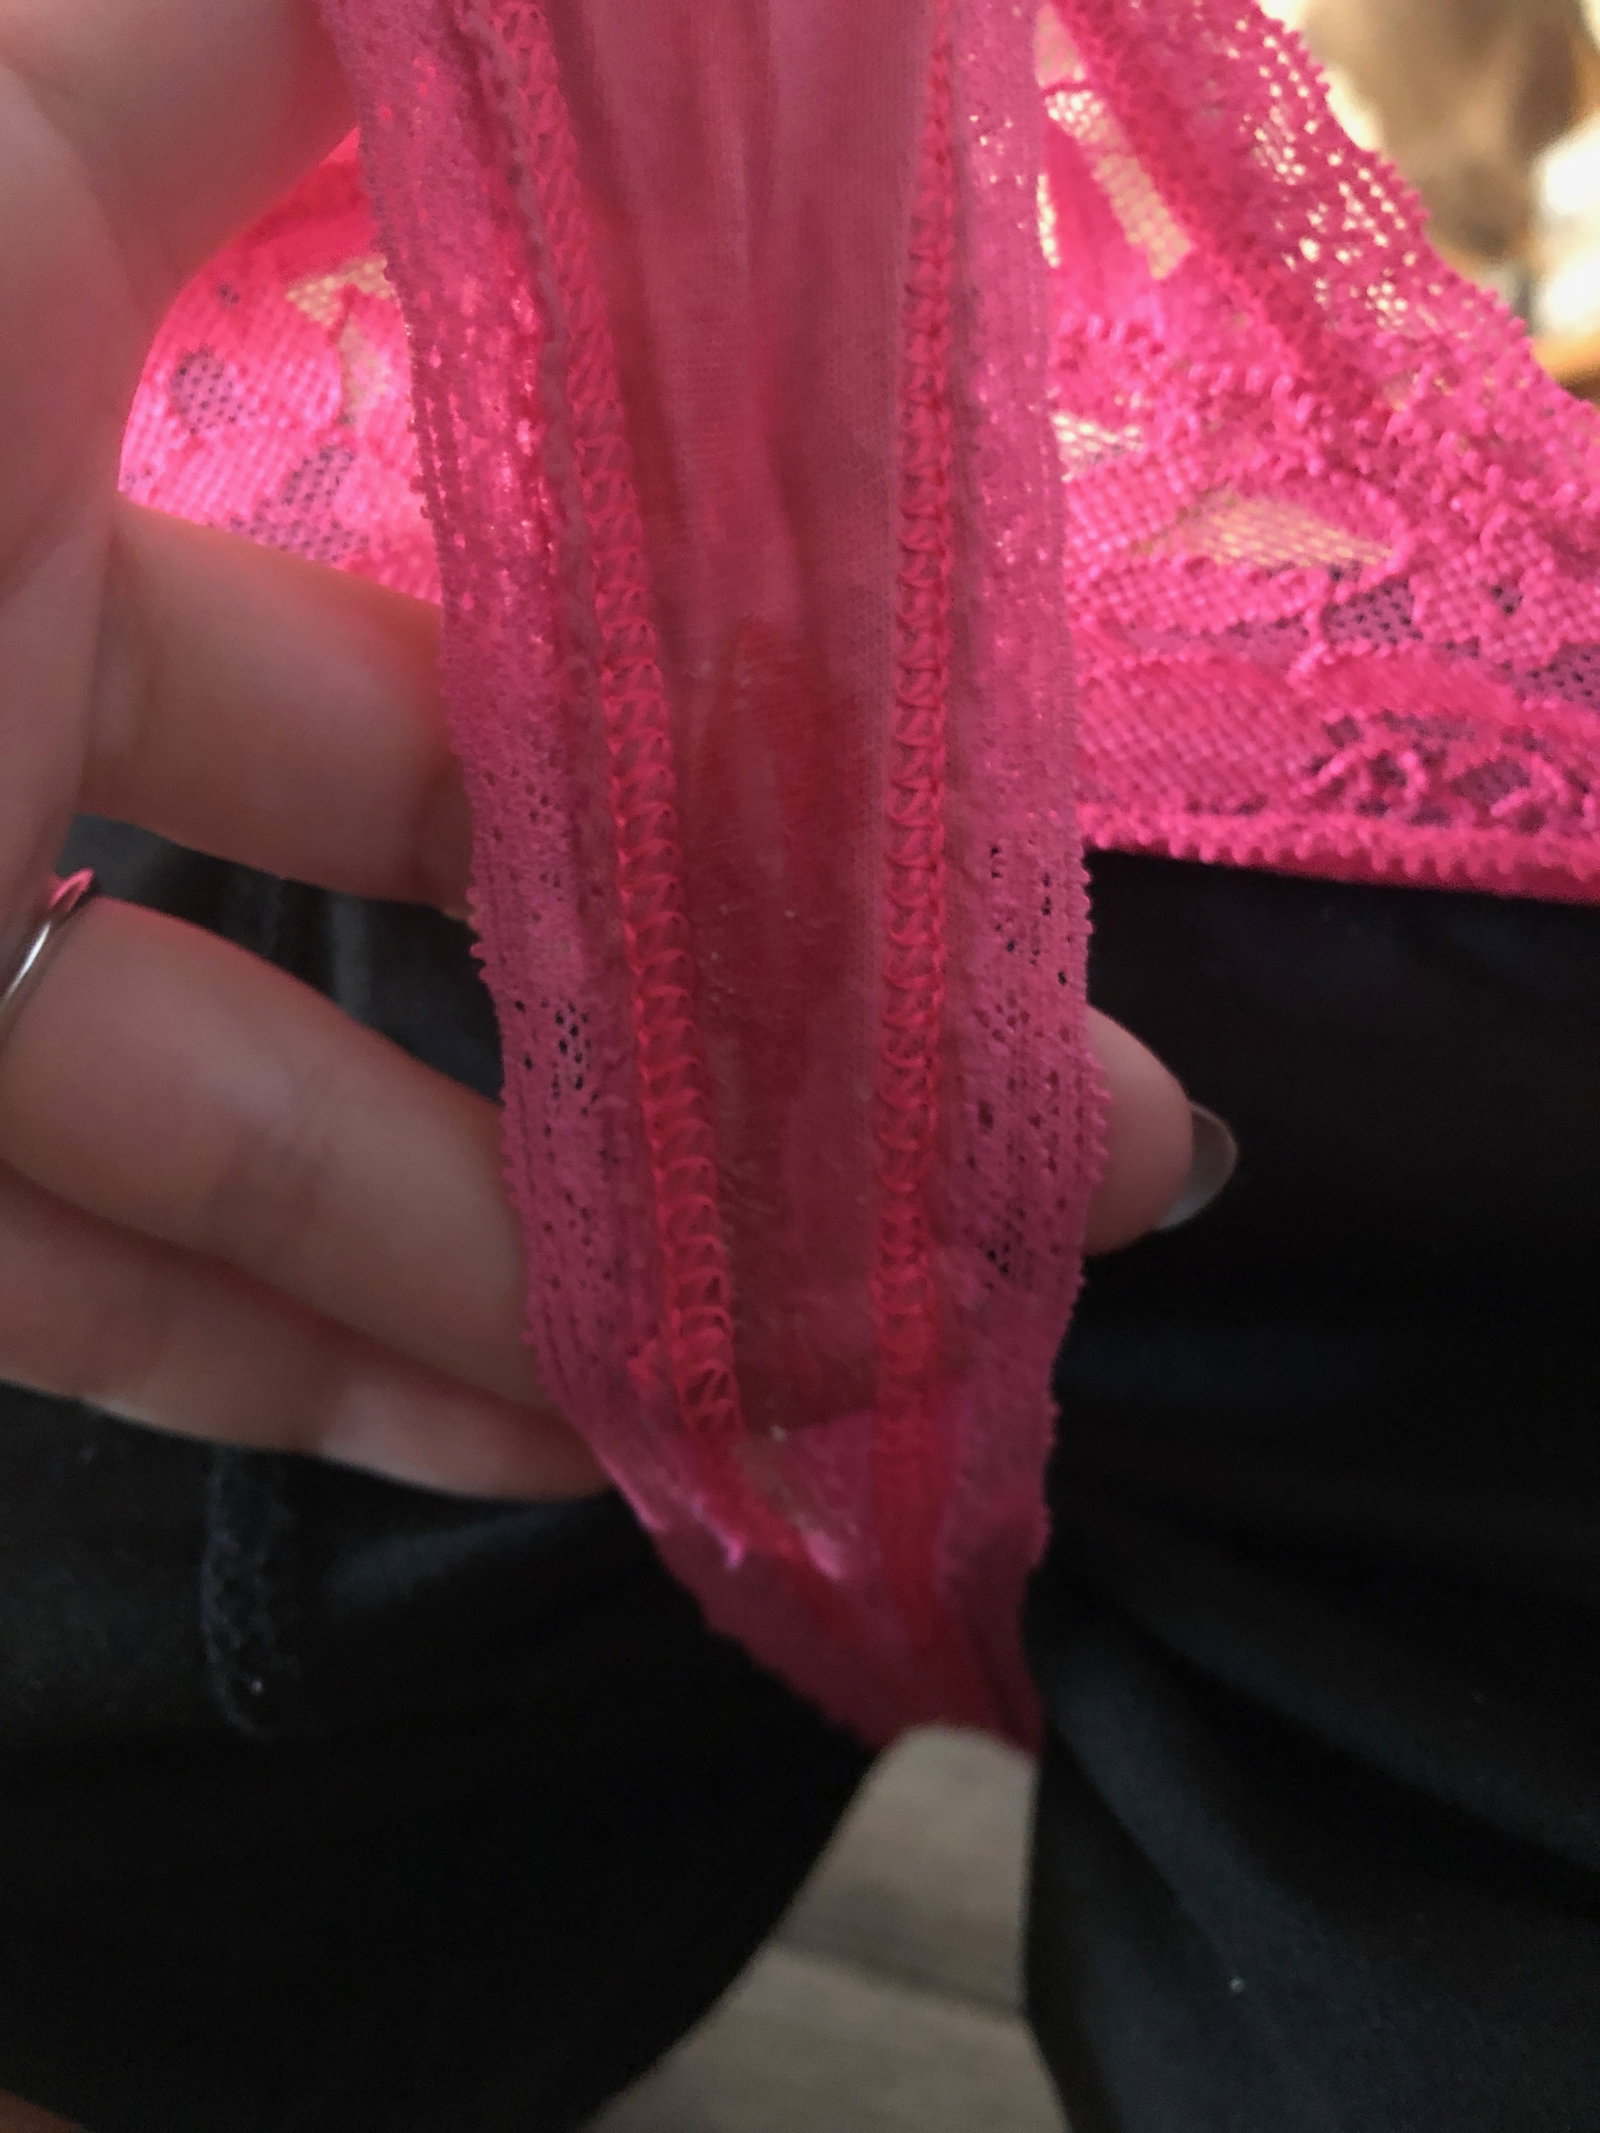 Watch the Photo by Domprincessboi2 with the username @Domprincessboi2, posted on November 11, 2020. The post is about the topic Real Couples. and the text says 'I love getting a pic of my HW's Panties soaked with a REAL mans cum. she loves to show me up!!  #hotwife #sharedwife #cummypanties  who else would like the opportunity to help her humiliate me??'